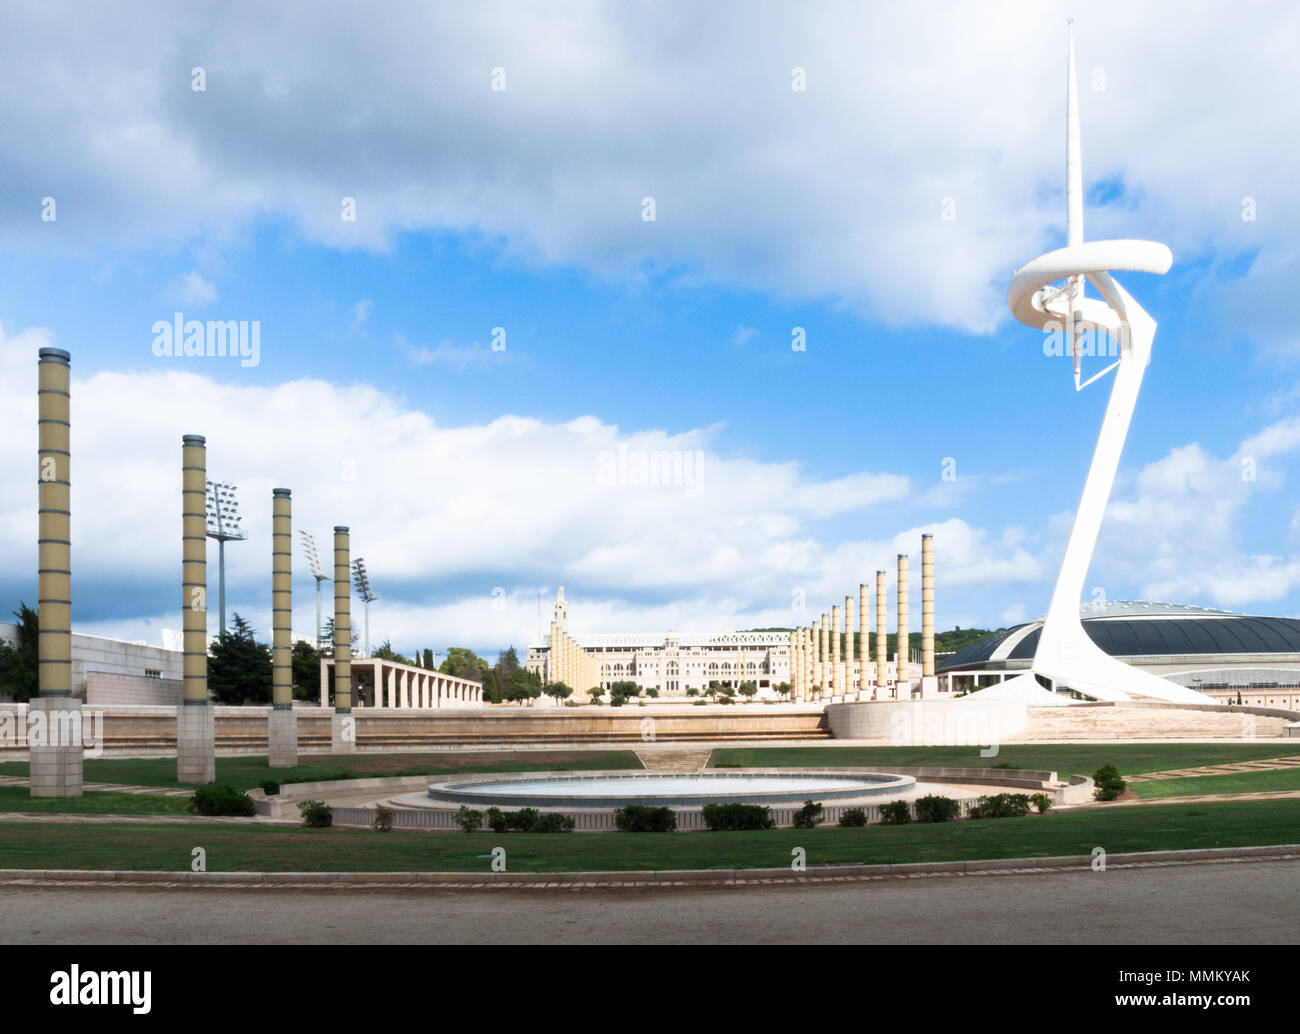 Barcelona, Spain / April 27, 2016: telecommunications tower in the form of a torch in the Olympic Park. The Olympic Games were in Barcelona in 1992. Stock Photo